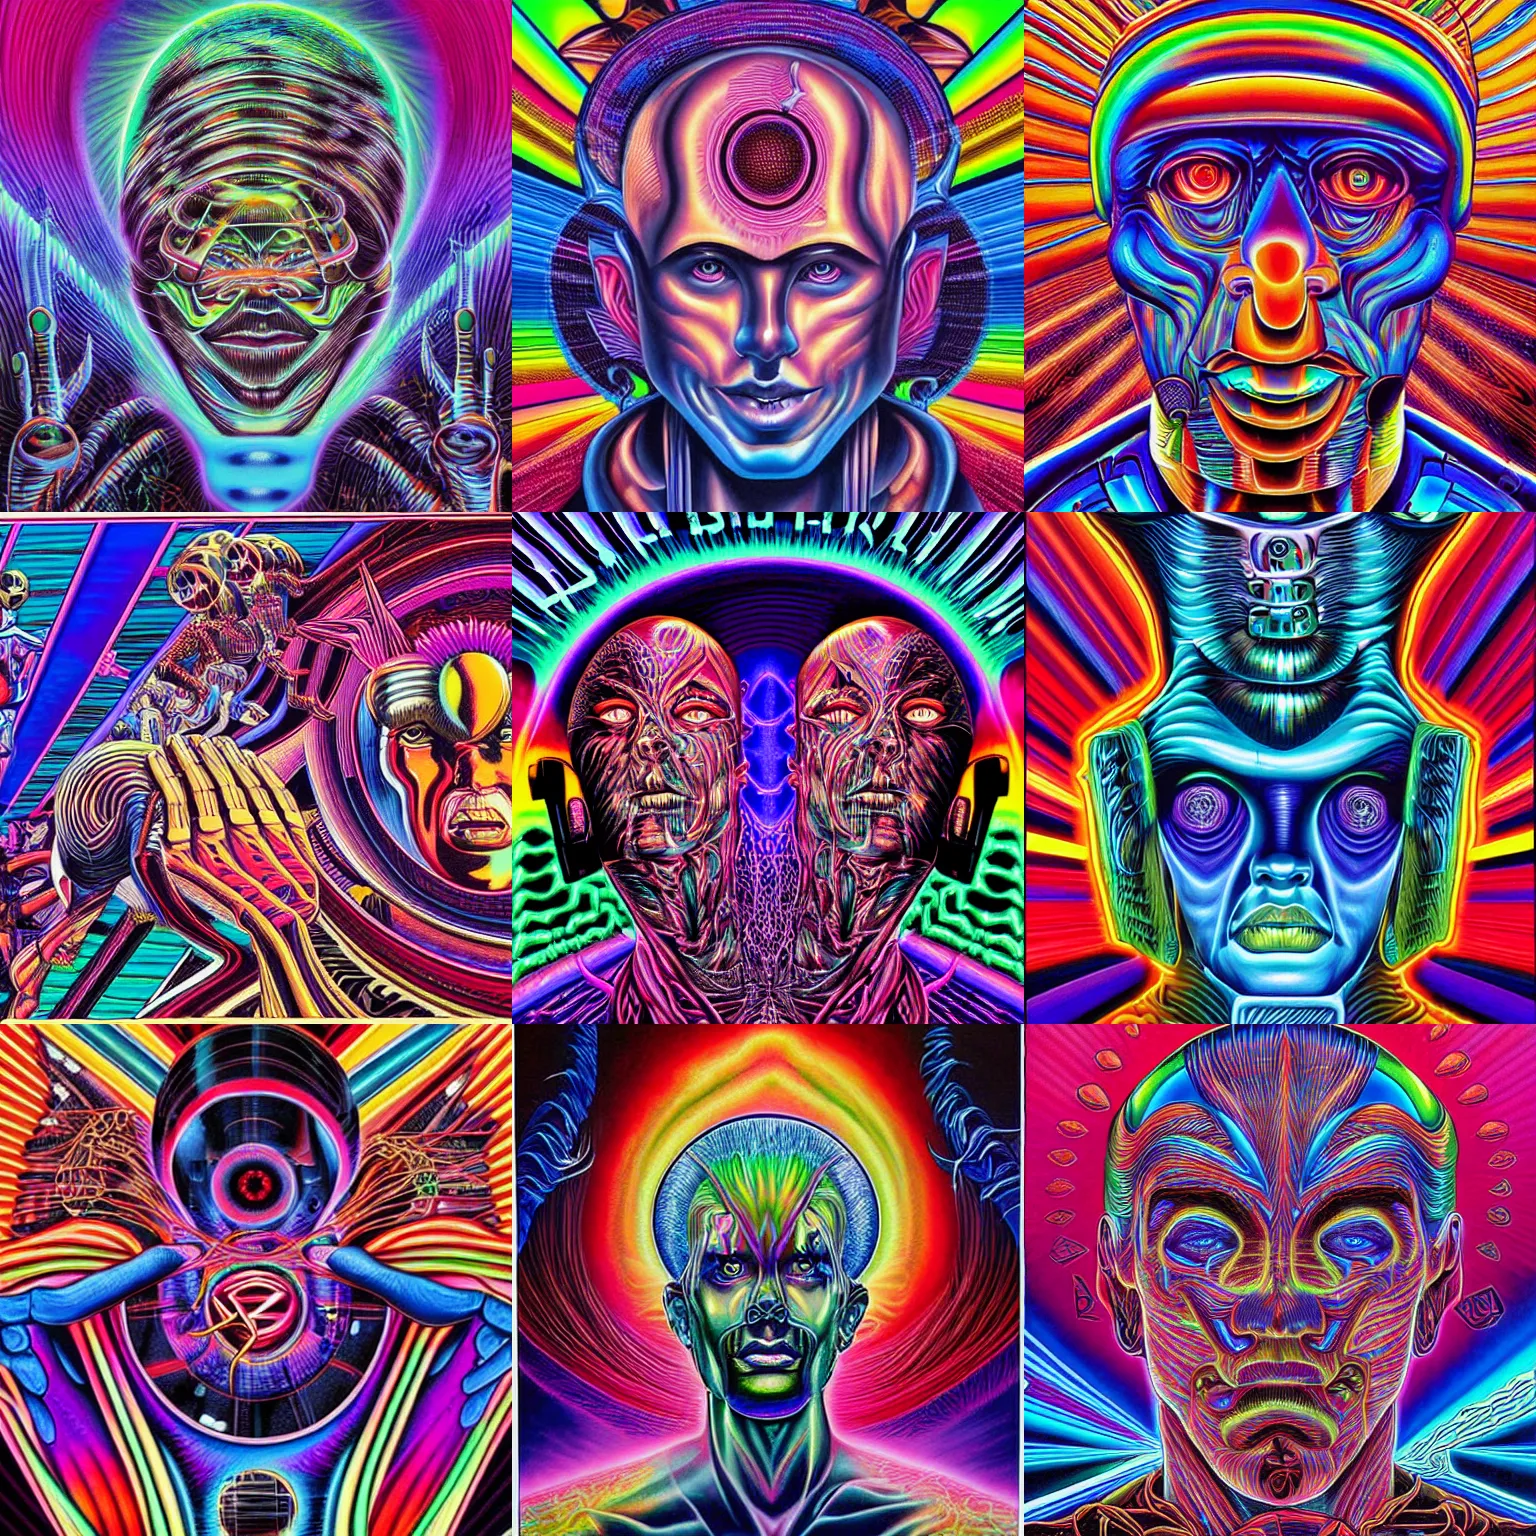 Prompt: synthwave painting by alex grey, android jones, chris dyer, and aaron brooks